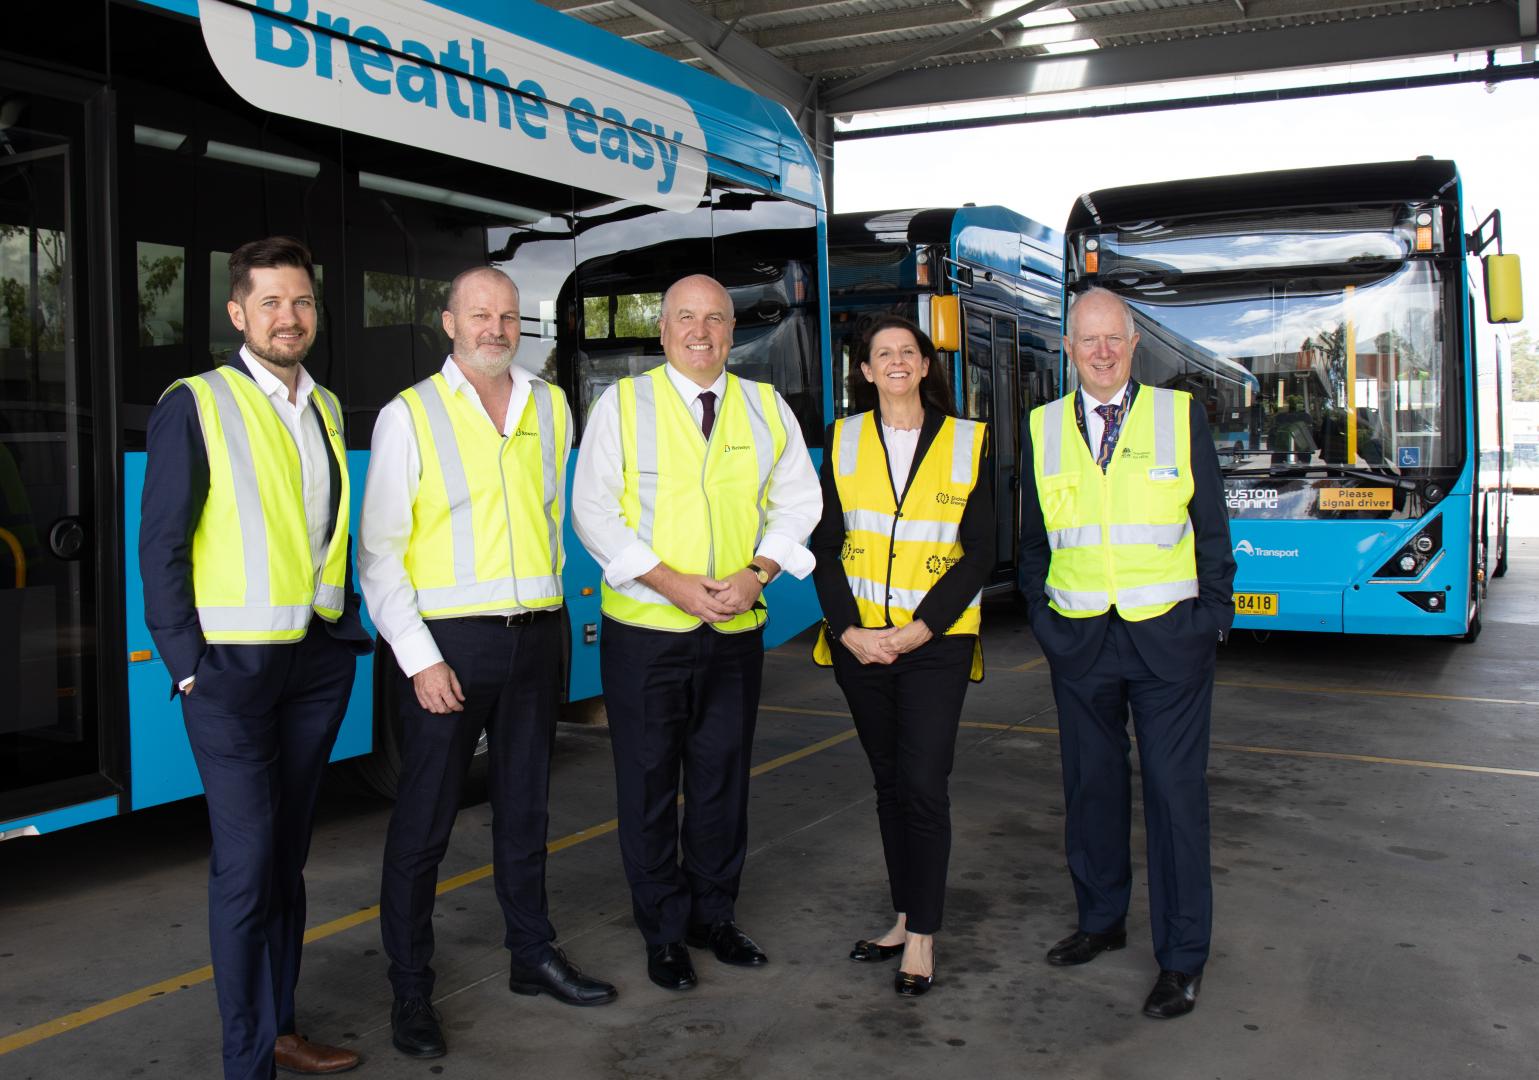 In front of the Busways Zero Emissions buses are L-R: Max Zaporoshenko, Zero Emissions Transport Director, Evenergi; Chris Wolf, Chief Operating Officer, Busways; The Hon. David Elliott Minister for Transport and Veterans Affairs, NSW Government;  Leanne Pickering, Chief Customer & Strategy Officer, Endeavour Energy; and Howard Collins, Chief Operating Officer, Transport for NSW